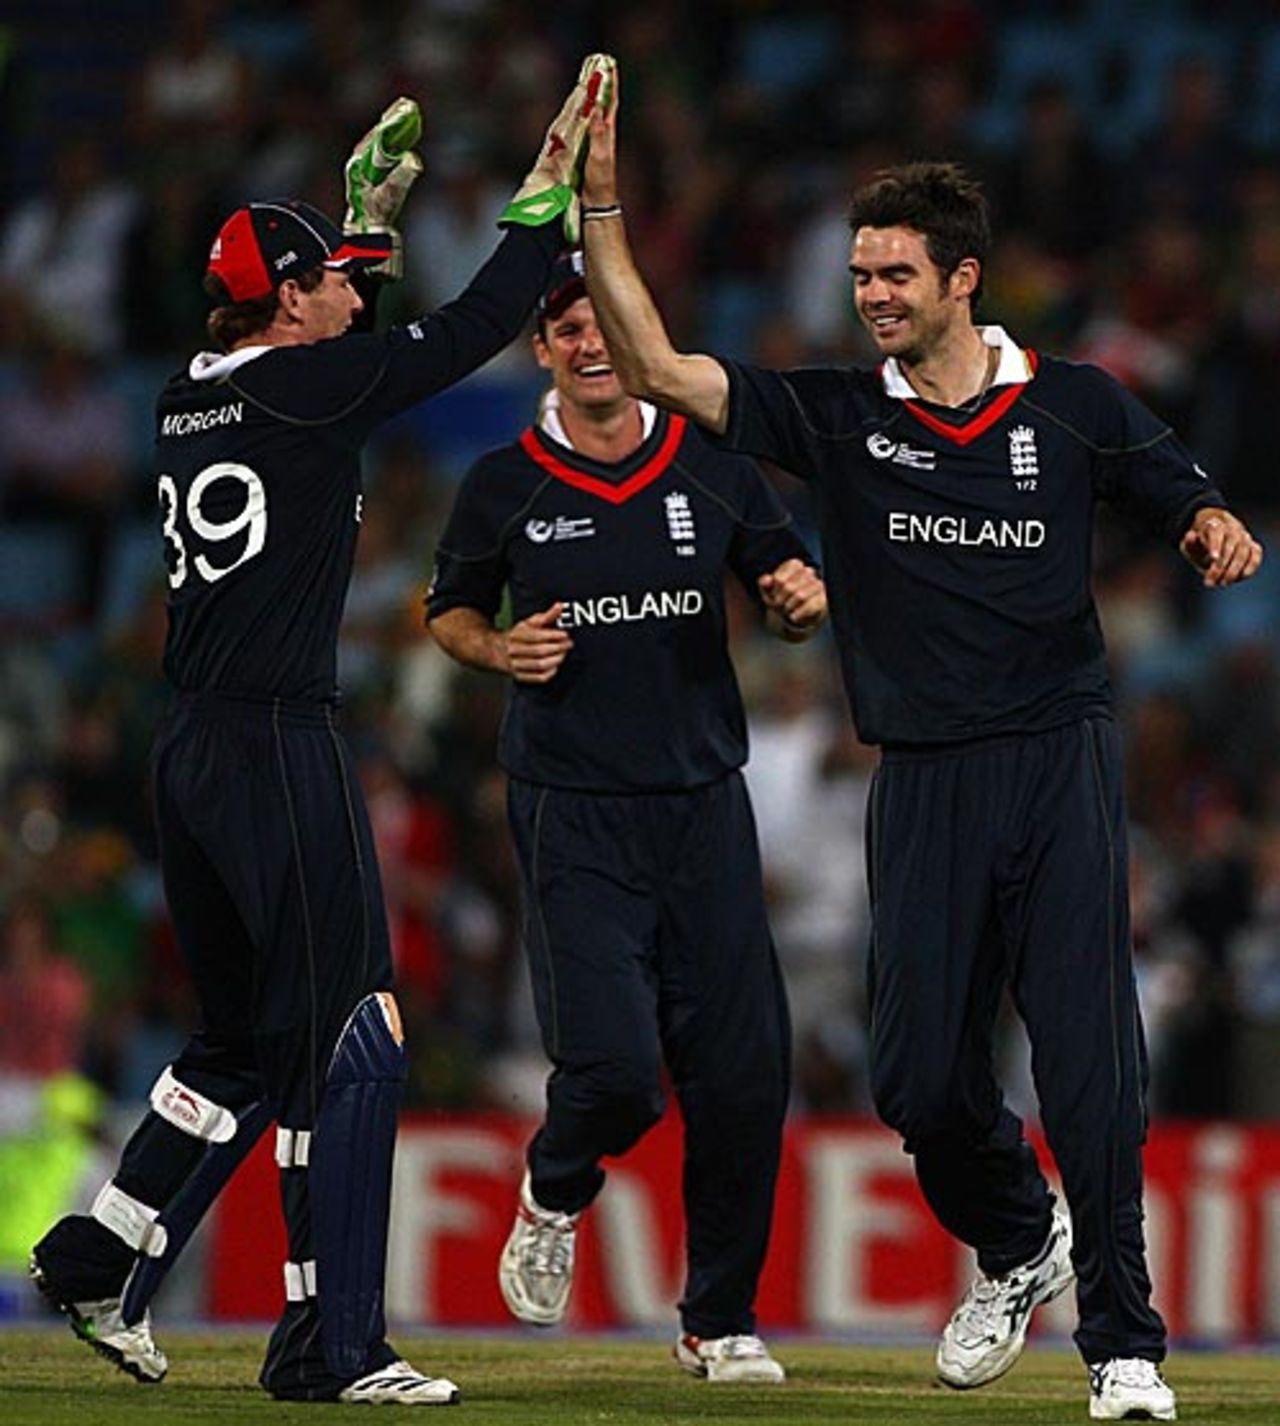 James Anderson was the pick of England's bowlers, South Africa v England, ICC Champions Trophy, Group B, Centurion, September 27, 2009